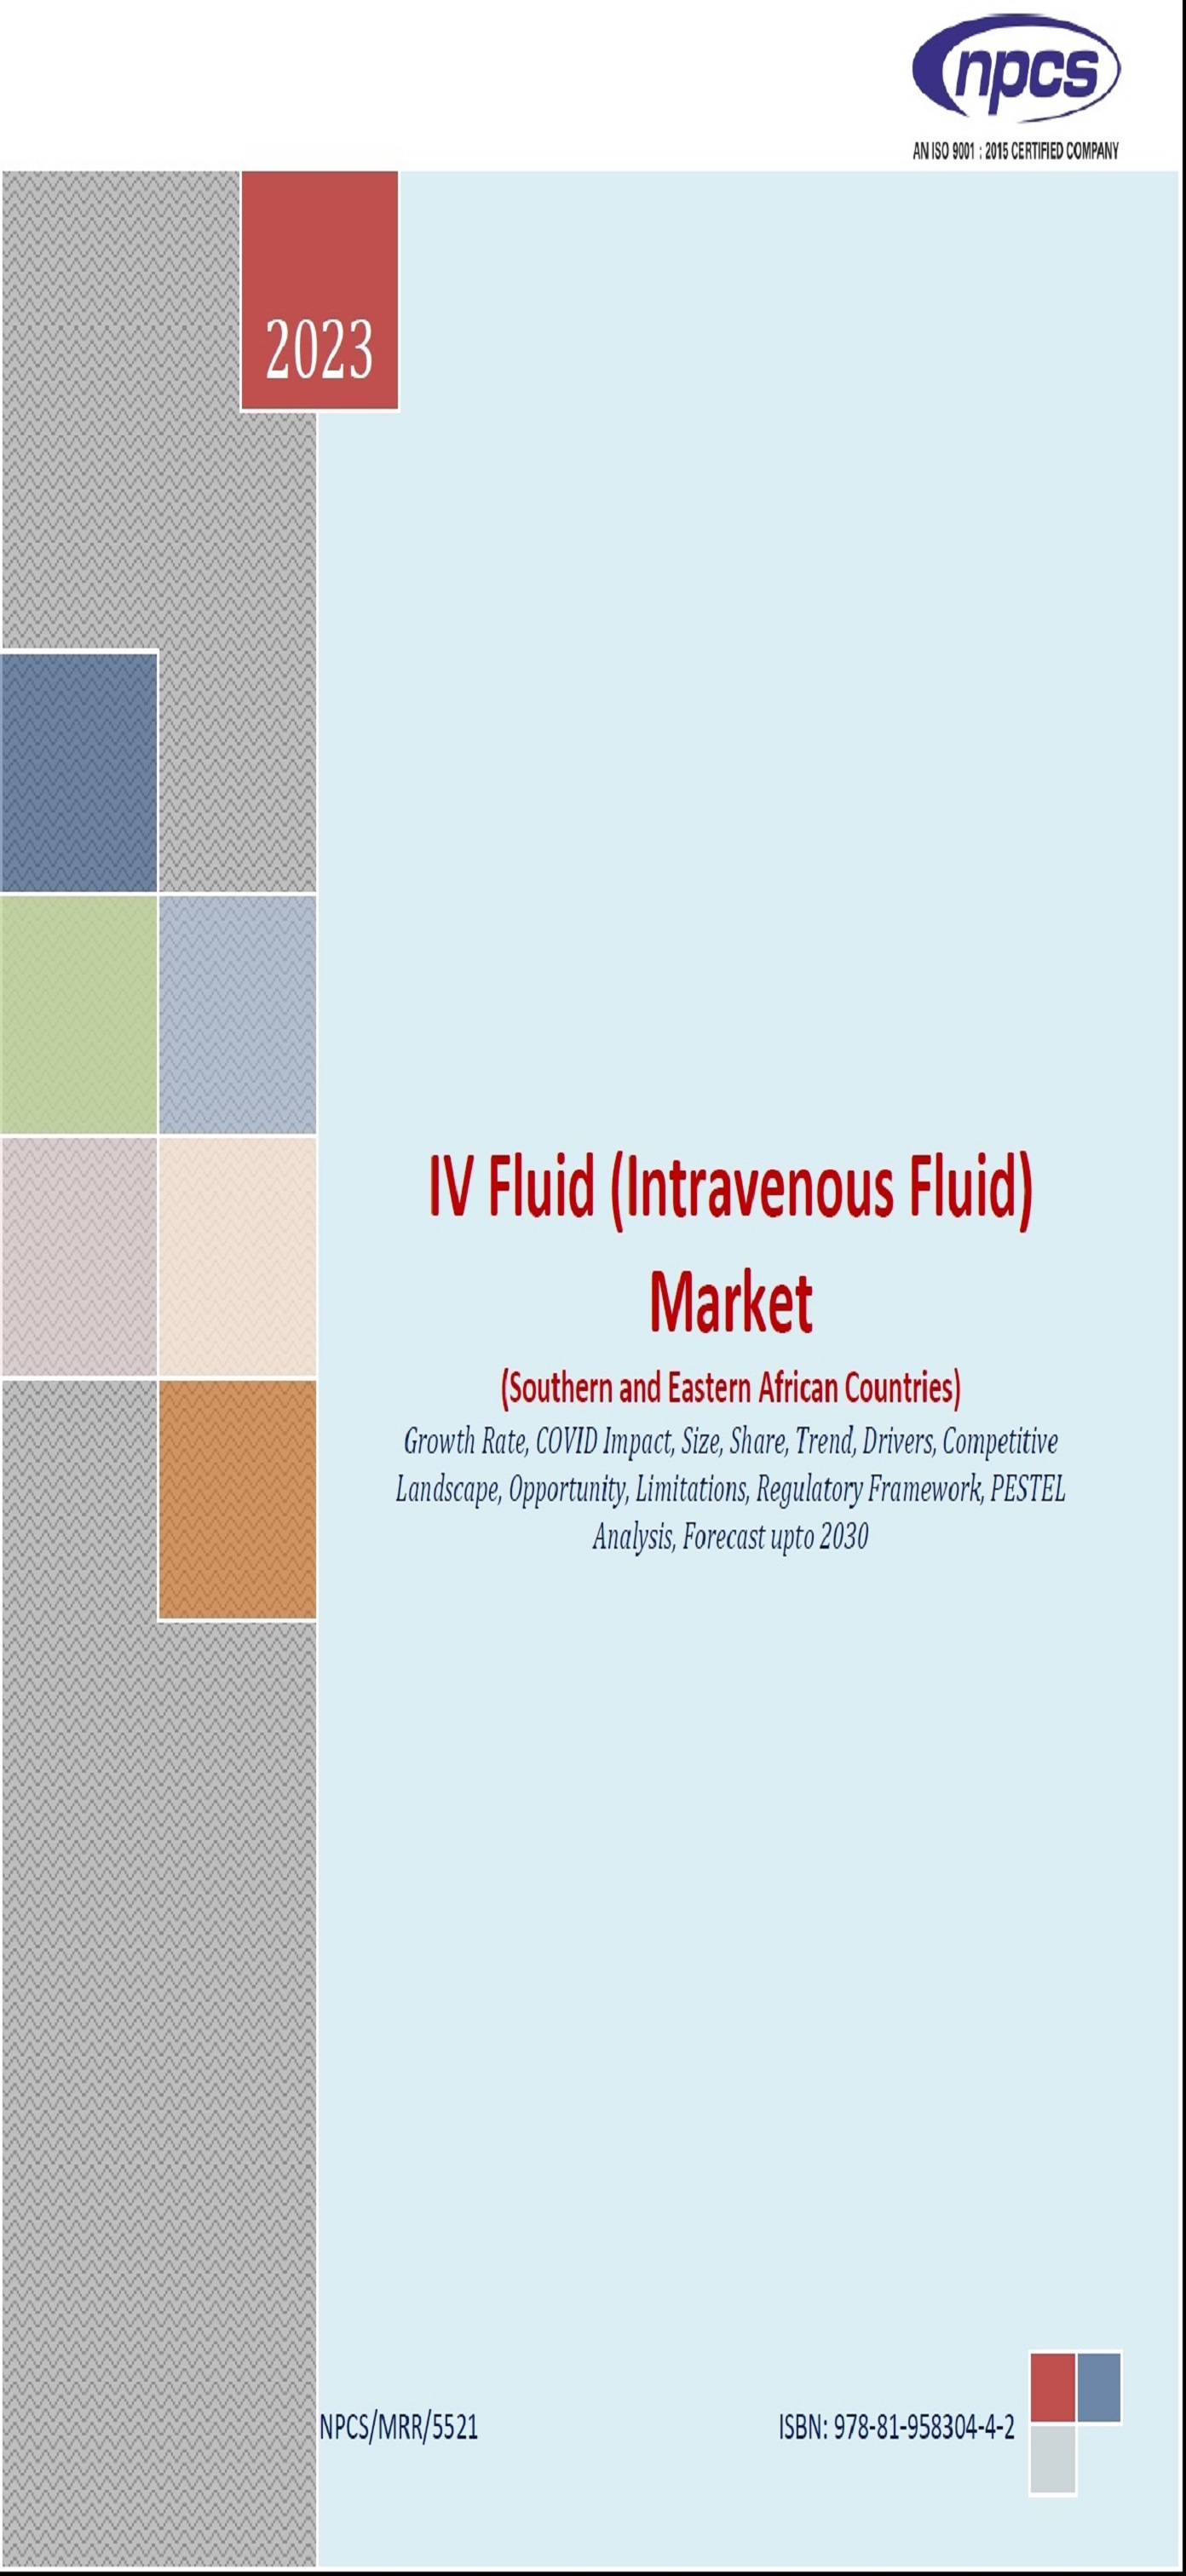 IV Fluid (Intravenous Fluid) Market (Southern and Eastern African Countries) Growth Rate, COVID Impact, Size, Share, Trend, Drivers, Competitive Landscape, Opportunity, Limitations, Regulatory Framework, PESTEL Analysis, Forecast upto 2030